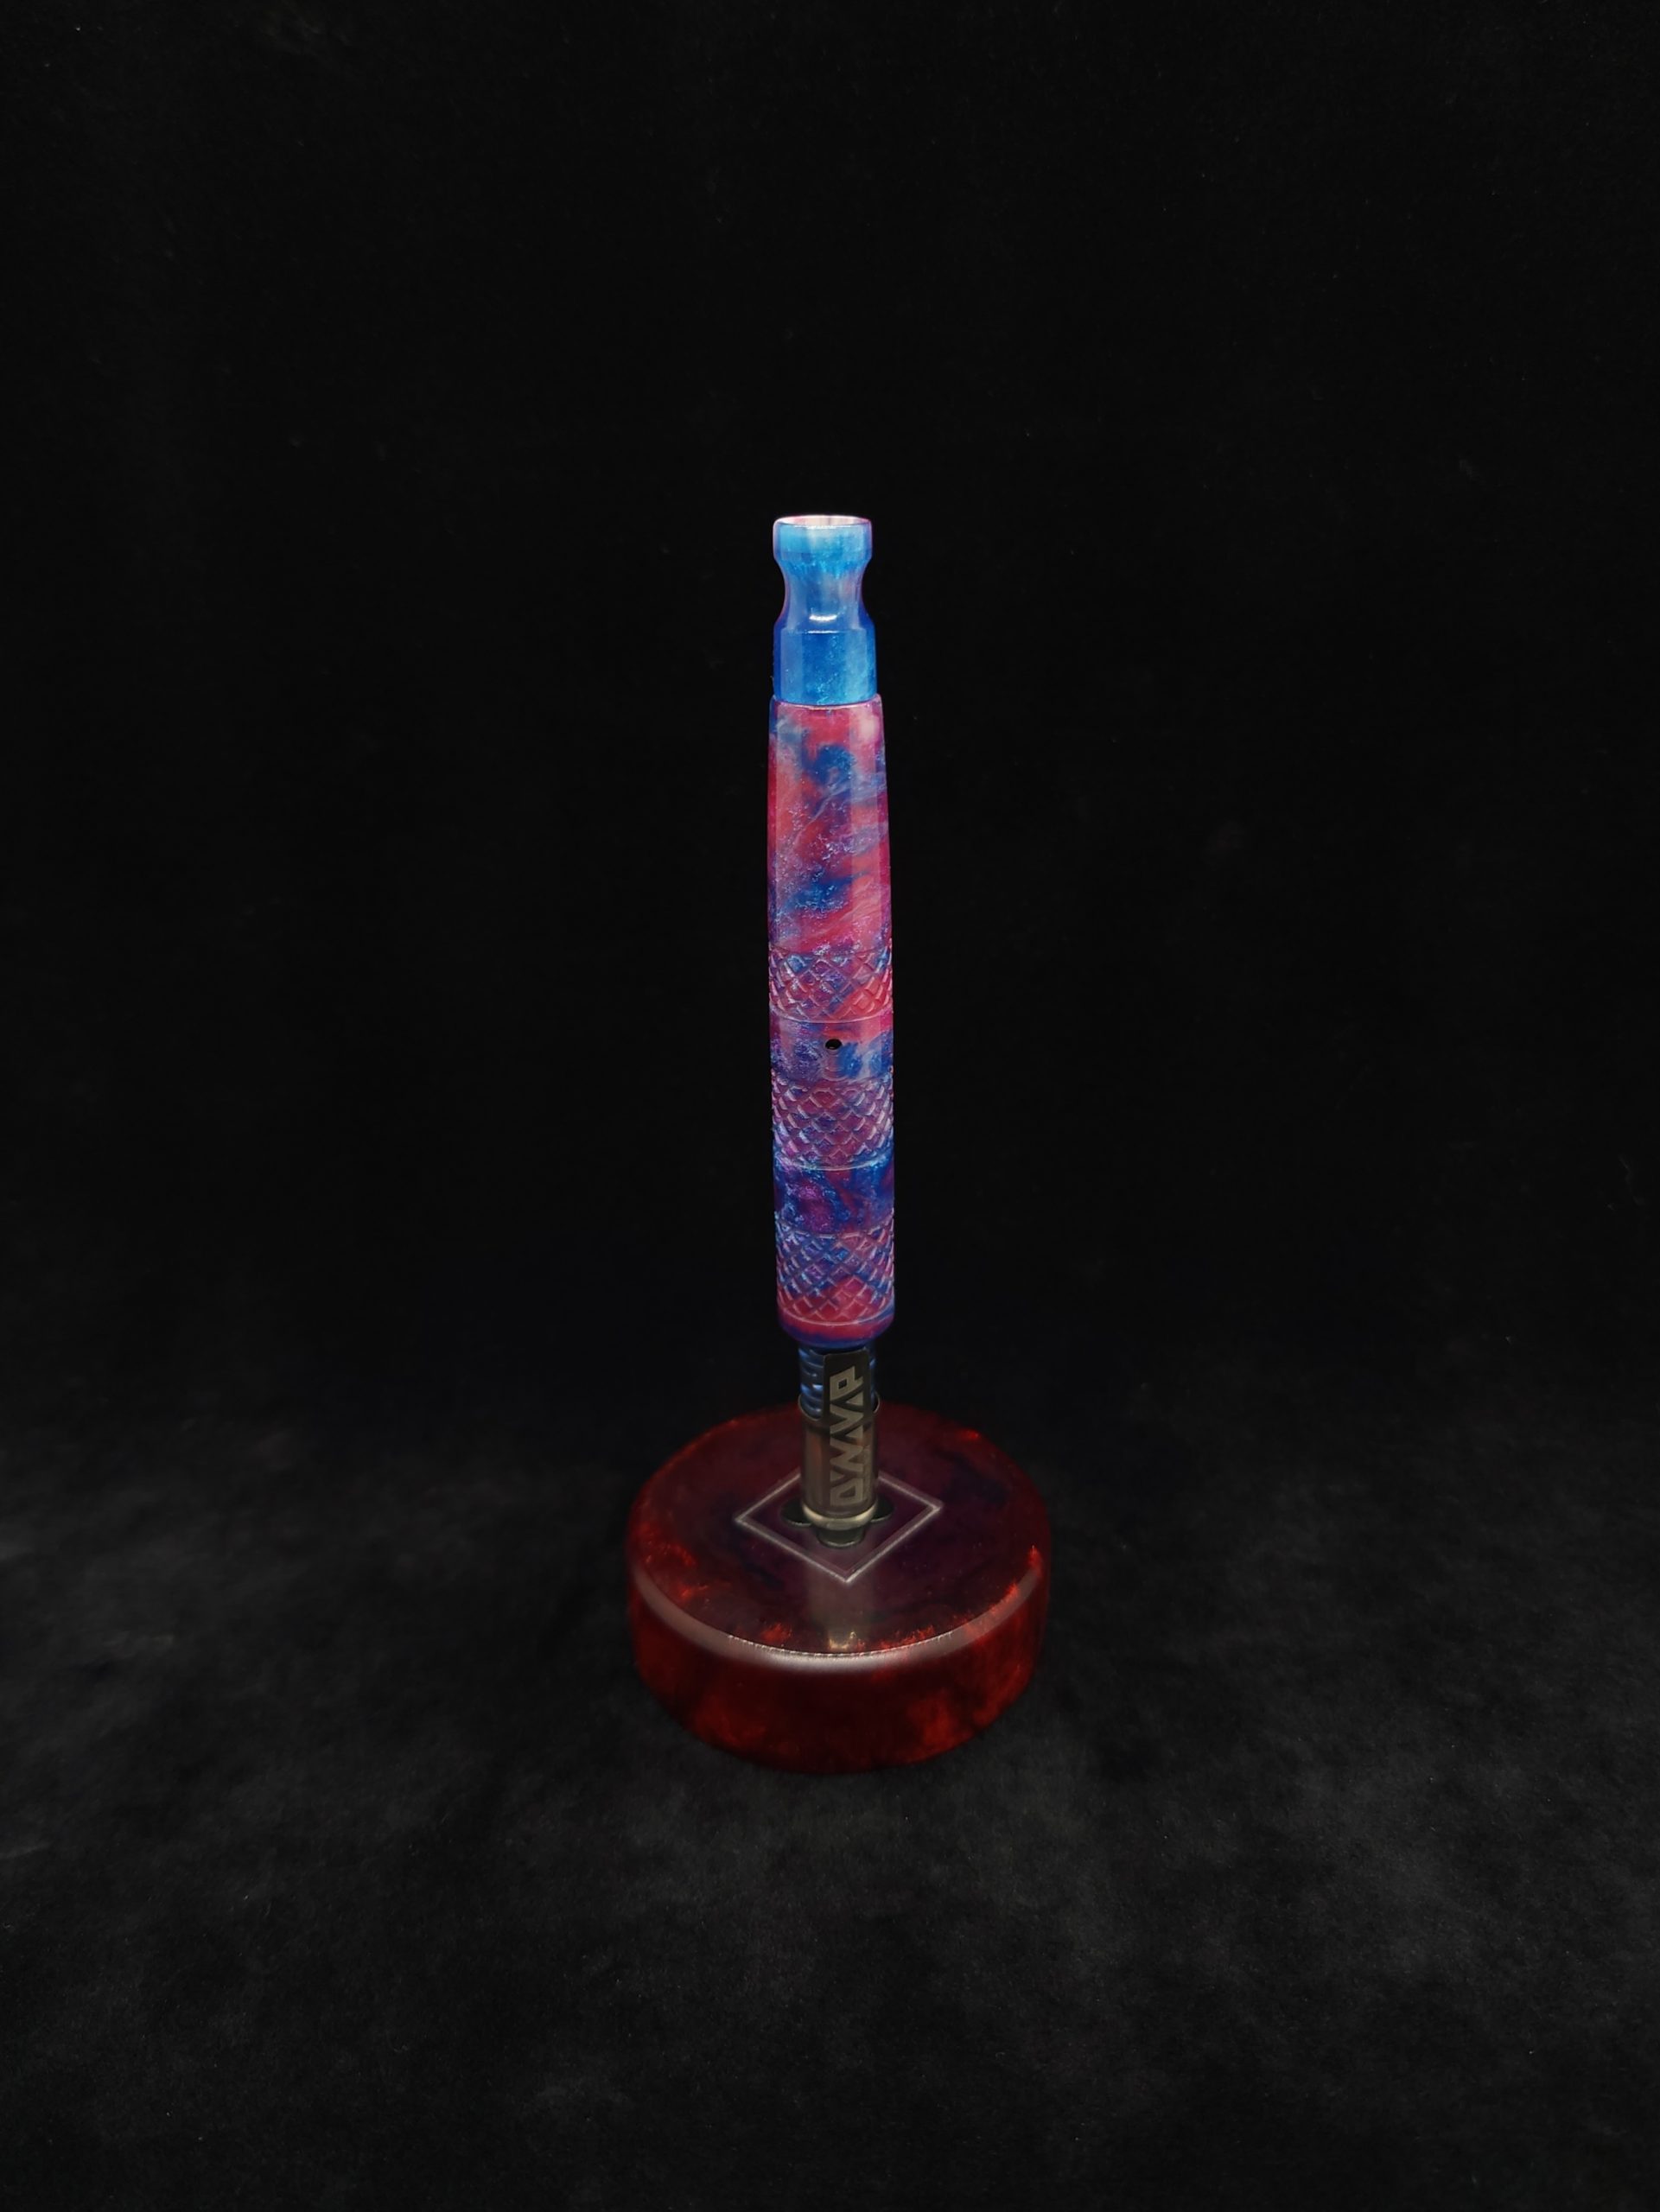 This image portrays High Class-Knurled XL Dynavap Stem/Luminescent Resin + Matching Mouthpiece by Dovetail Woodwork.